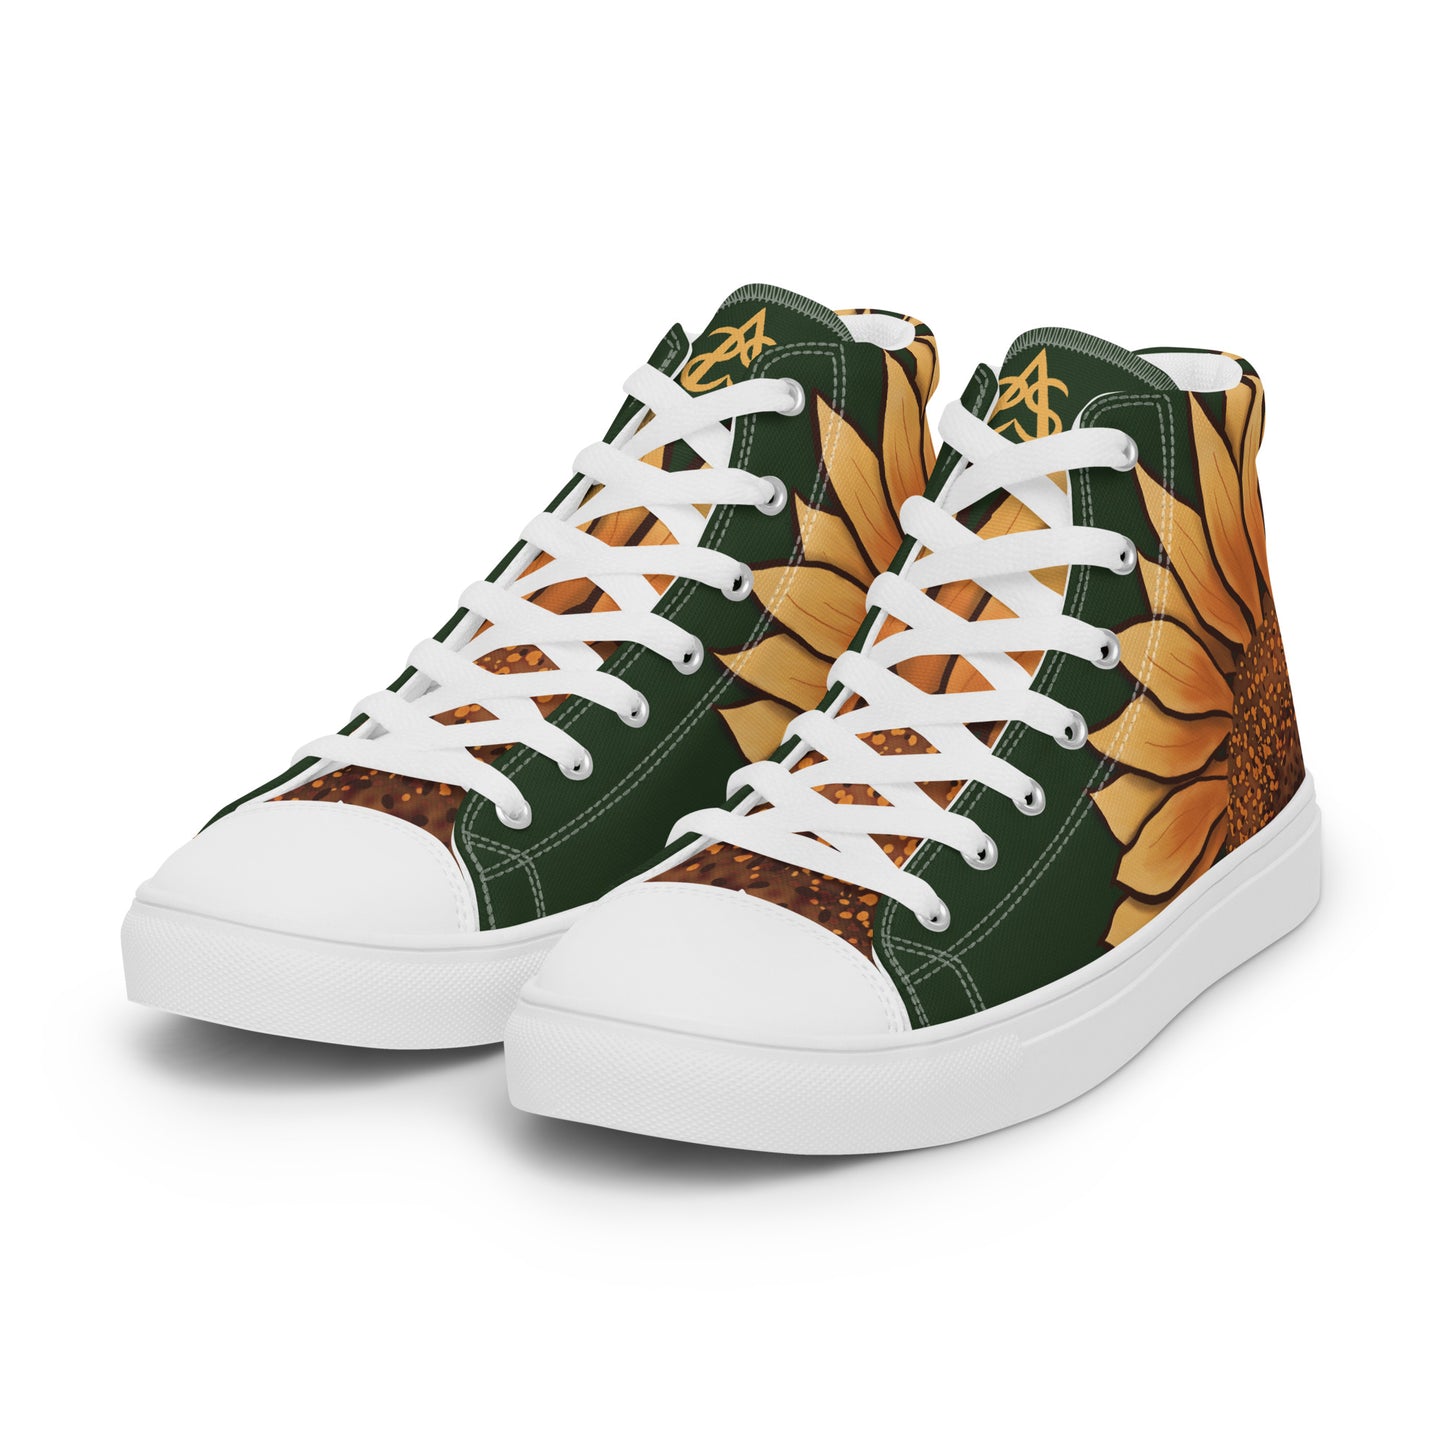 Left front view showing the same sunflower up the tongues of the shoes with the Aras Sivad Studio logo in gold.